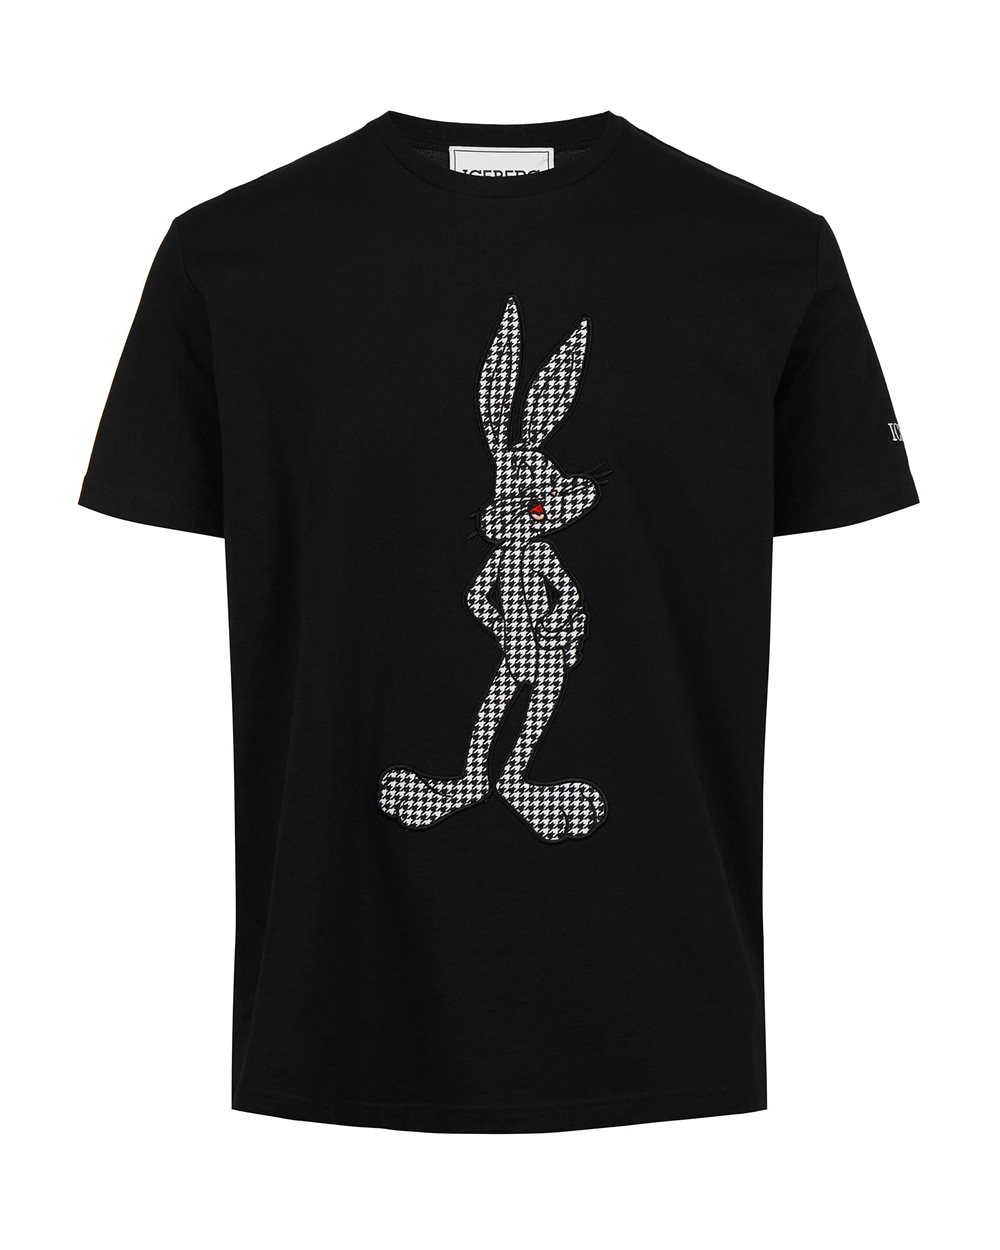 Black T-shirt with cartoon detail - Clothing | Iceberg - Official Website